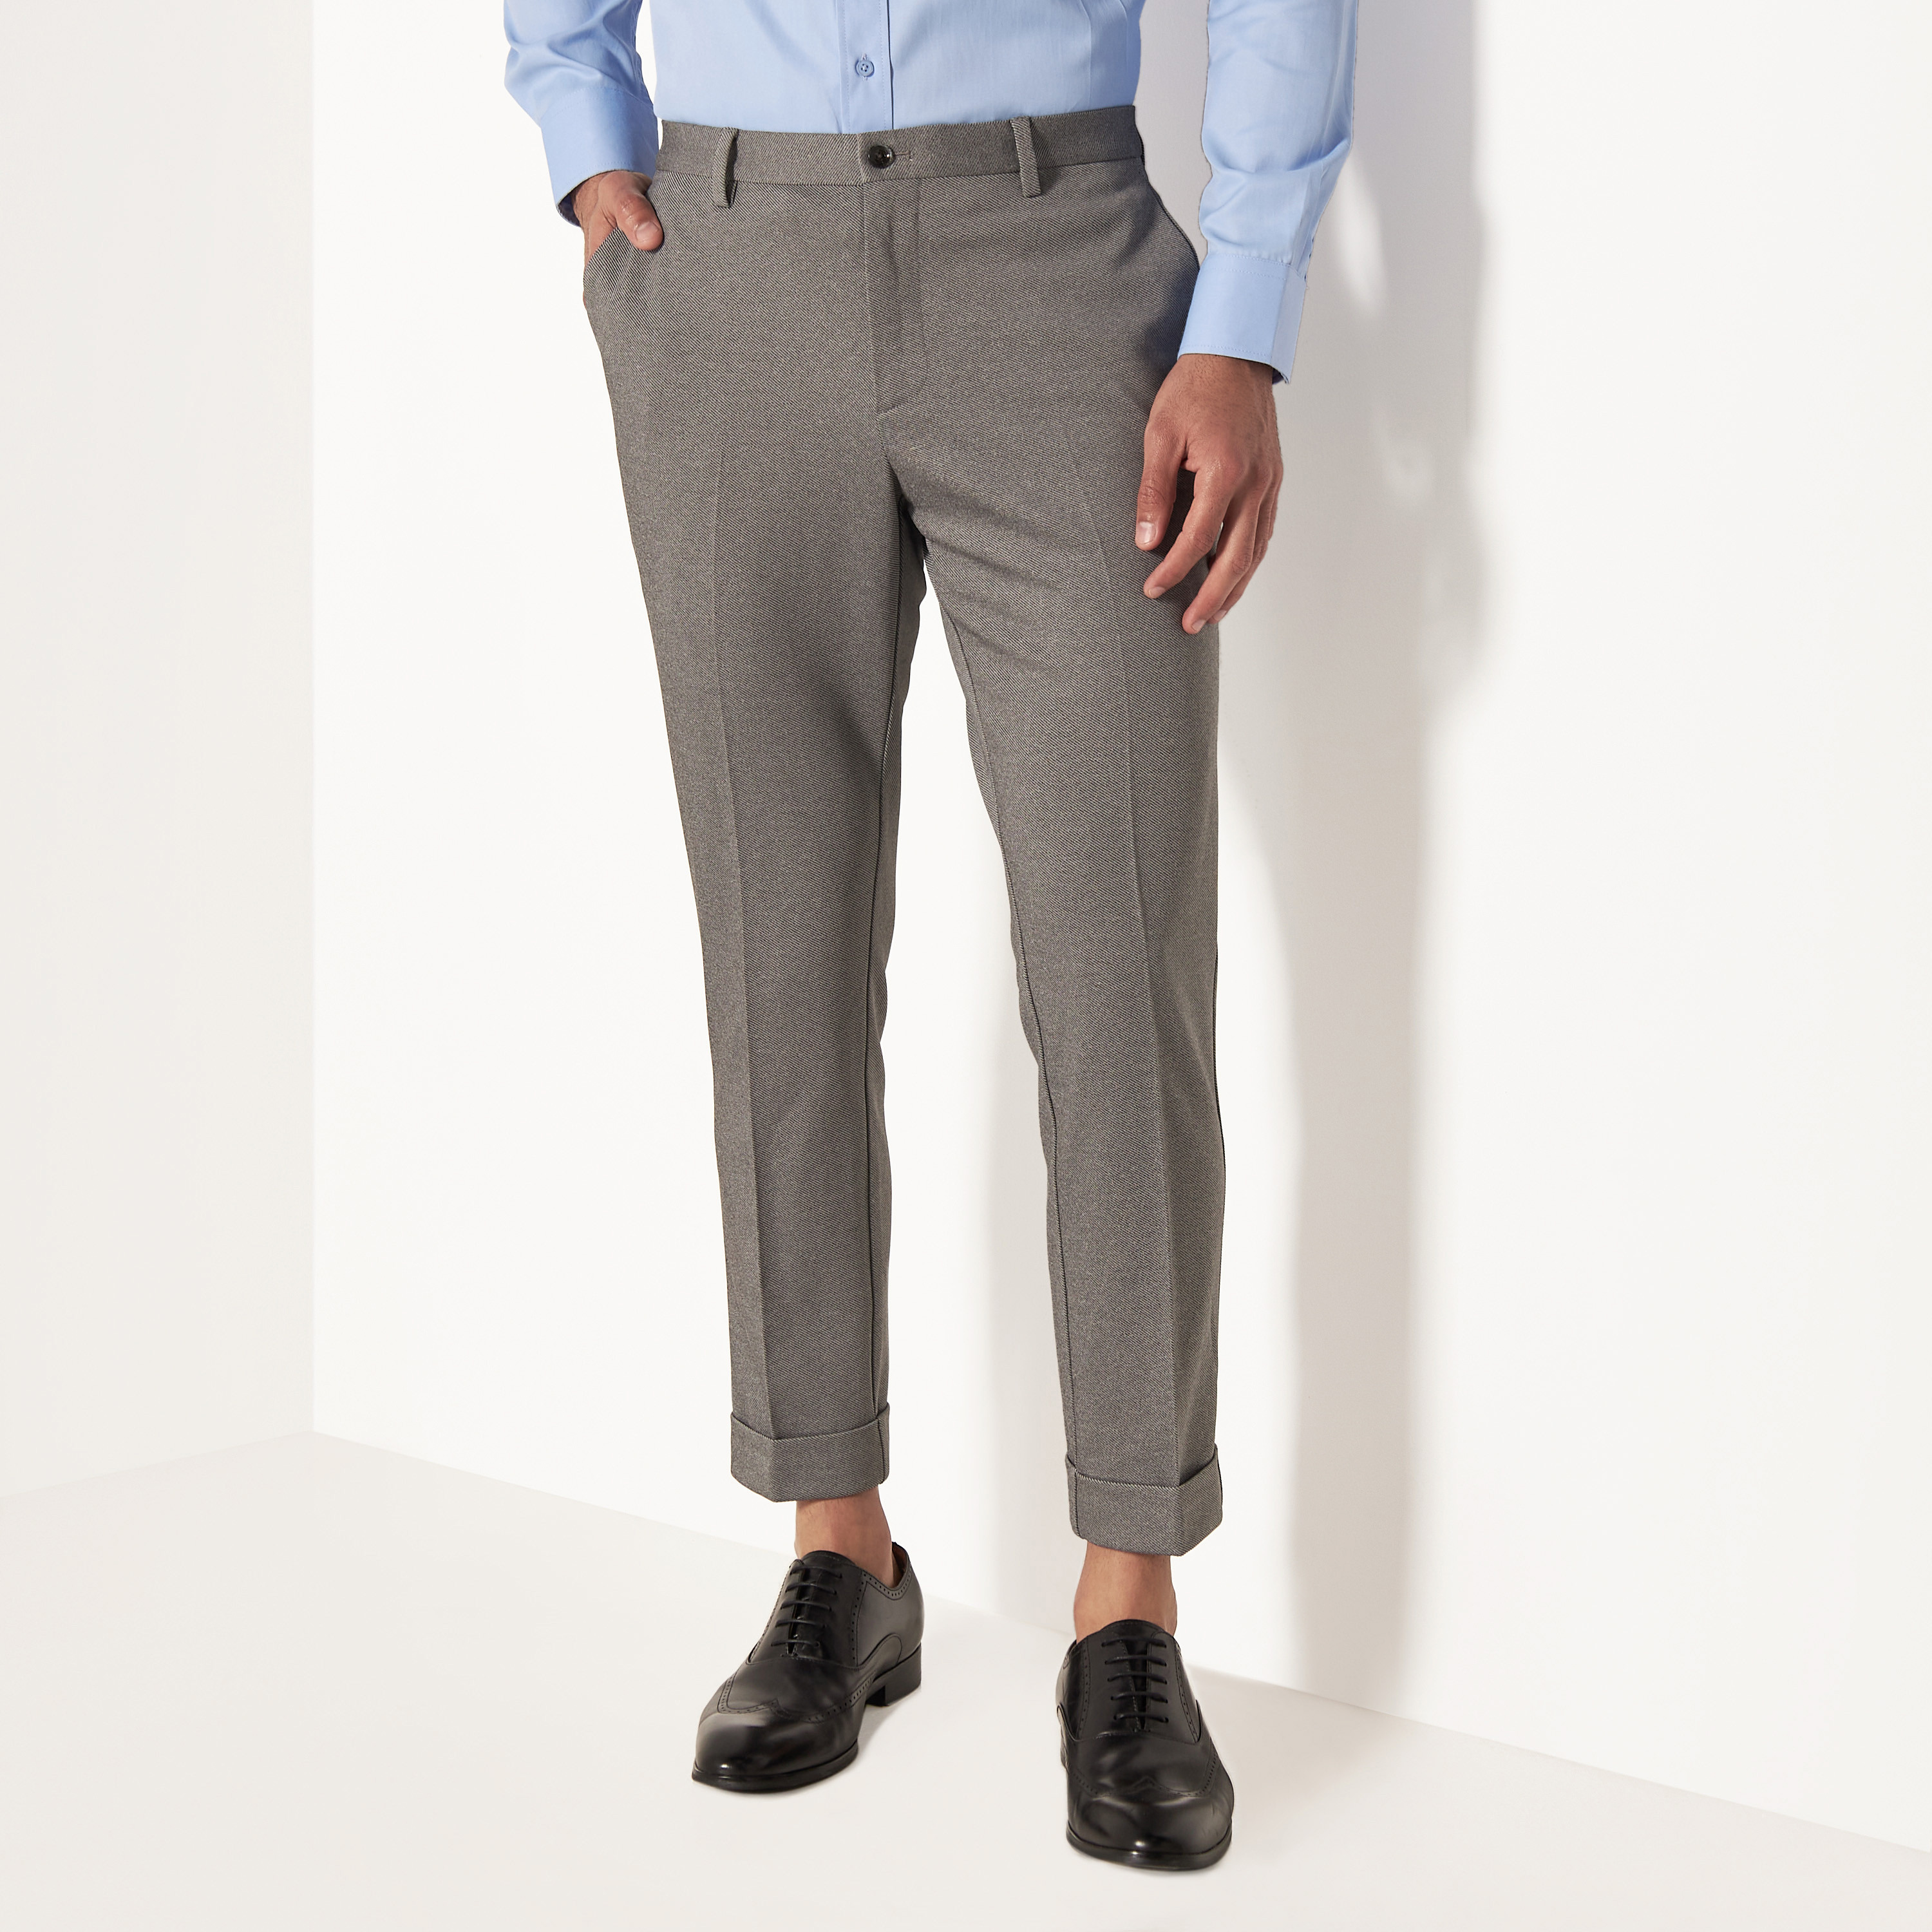 Buy Formal Trousers For Men Online South Africa | Khaliques